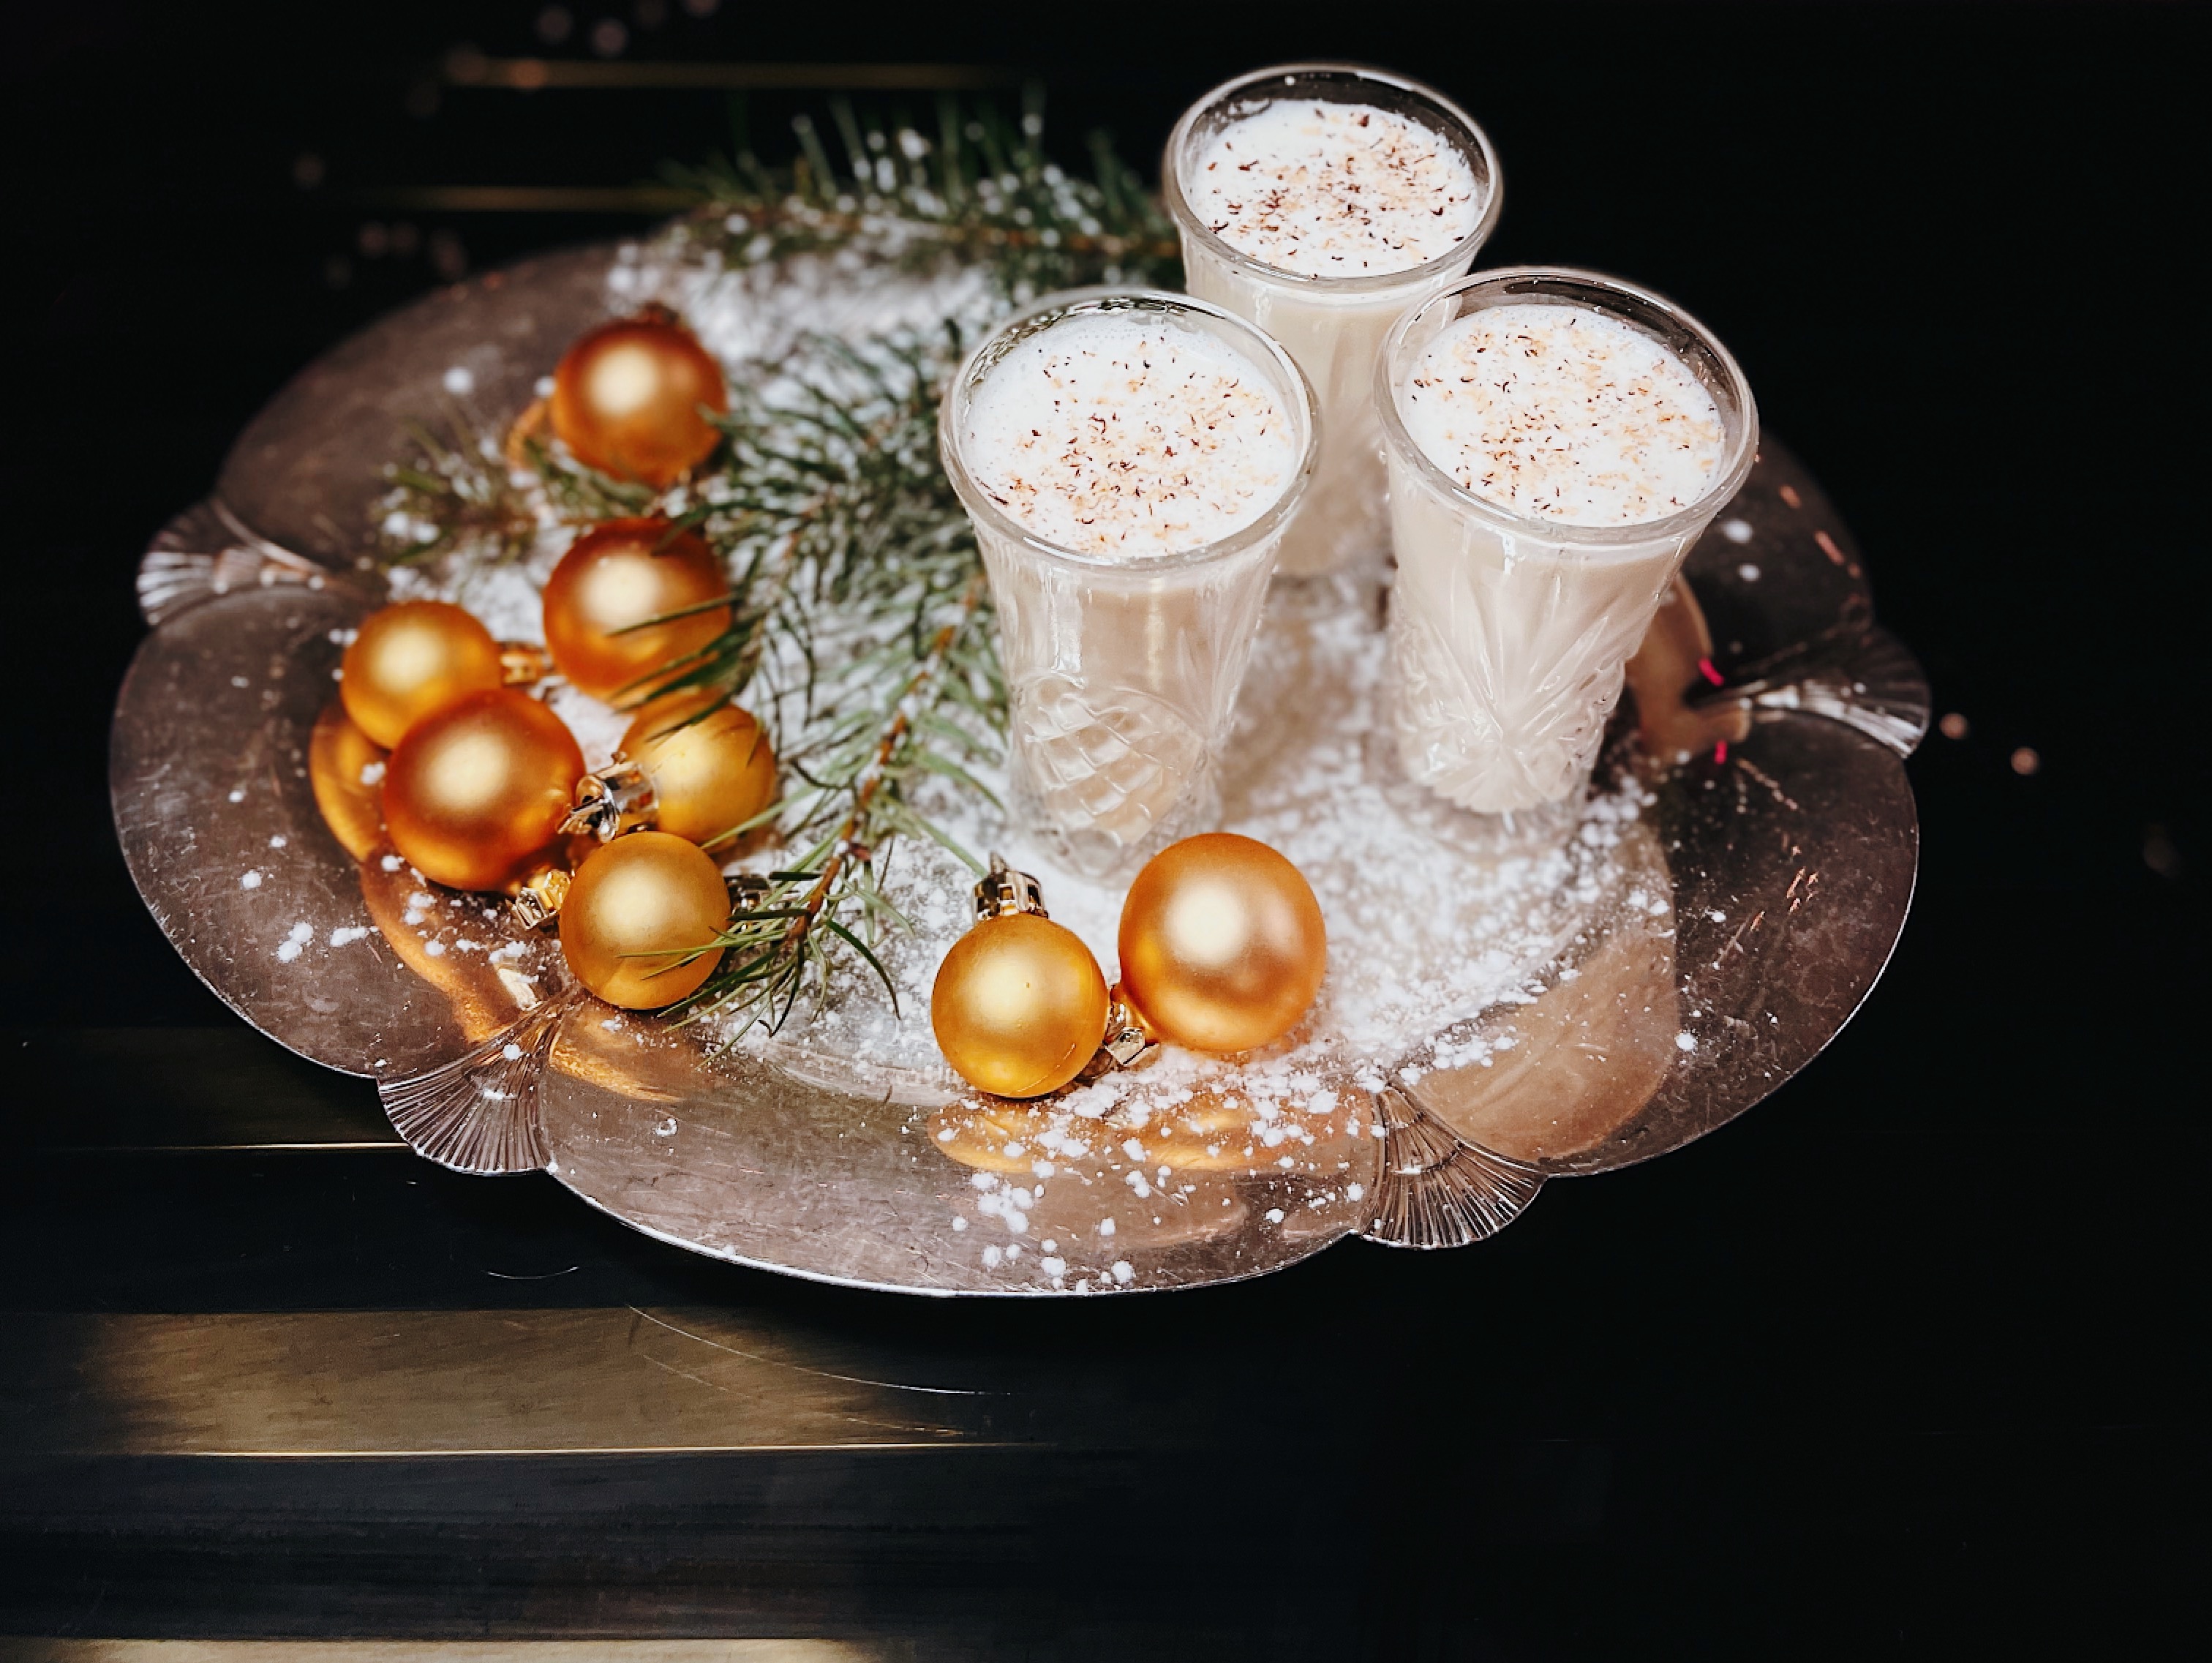 Three glasses of eggnog sit on a tray next to Christmas ornaments.